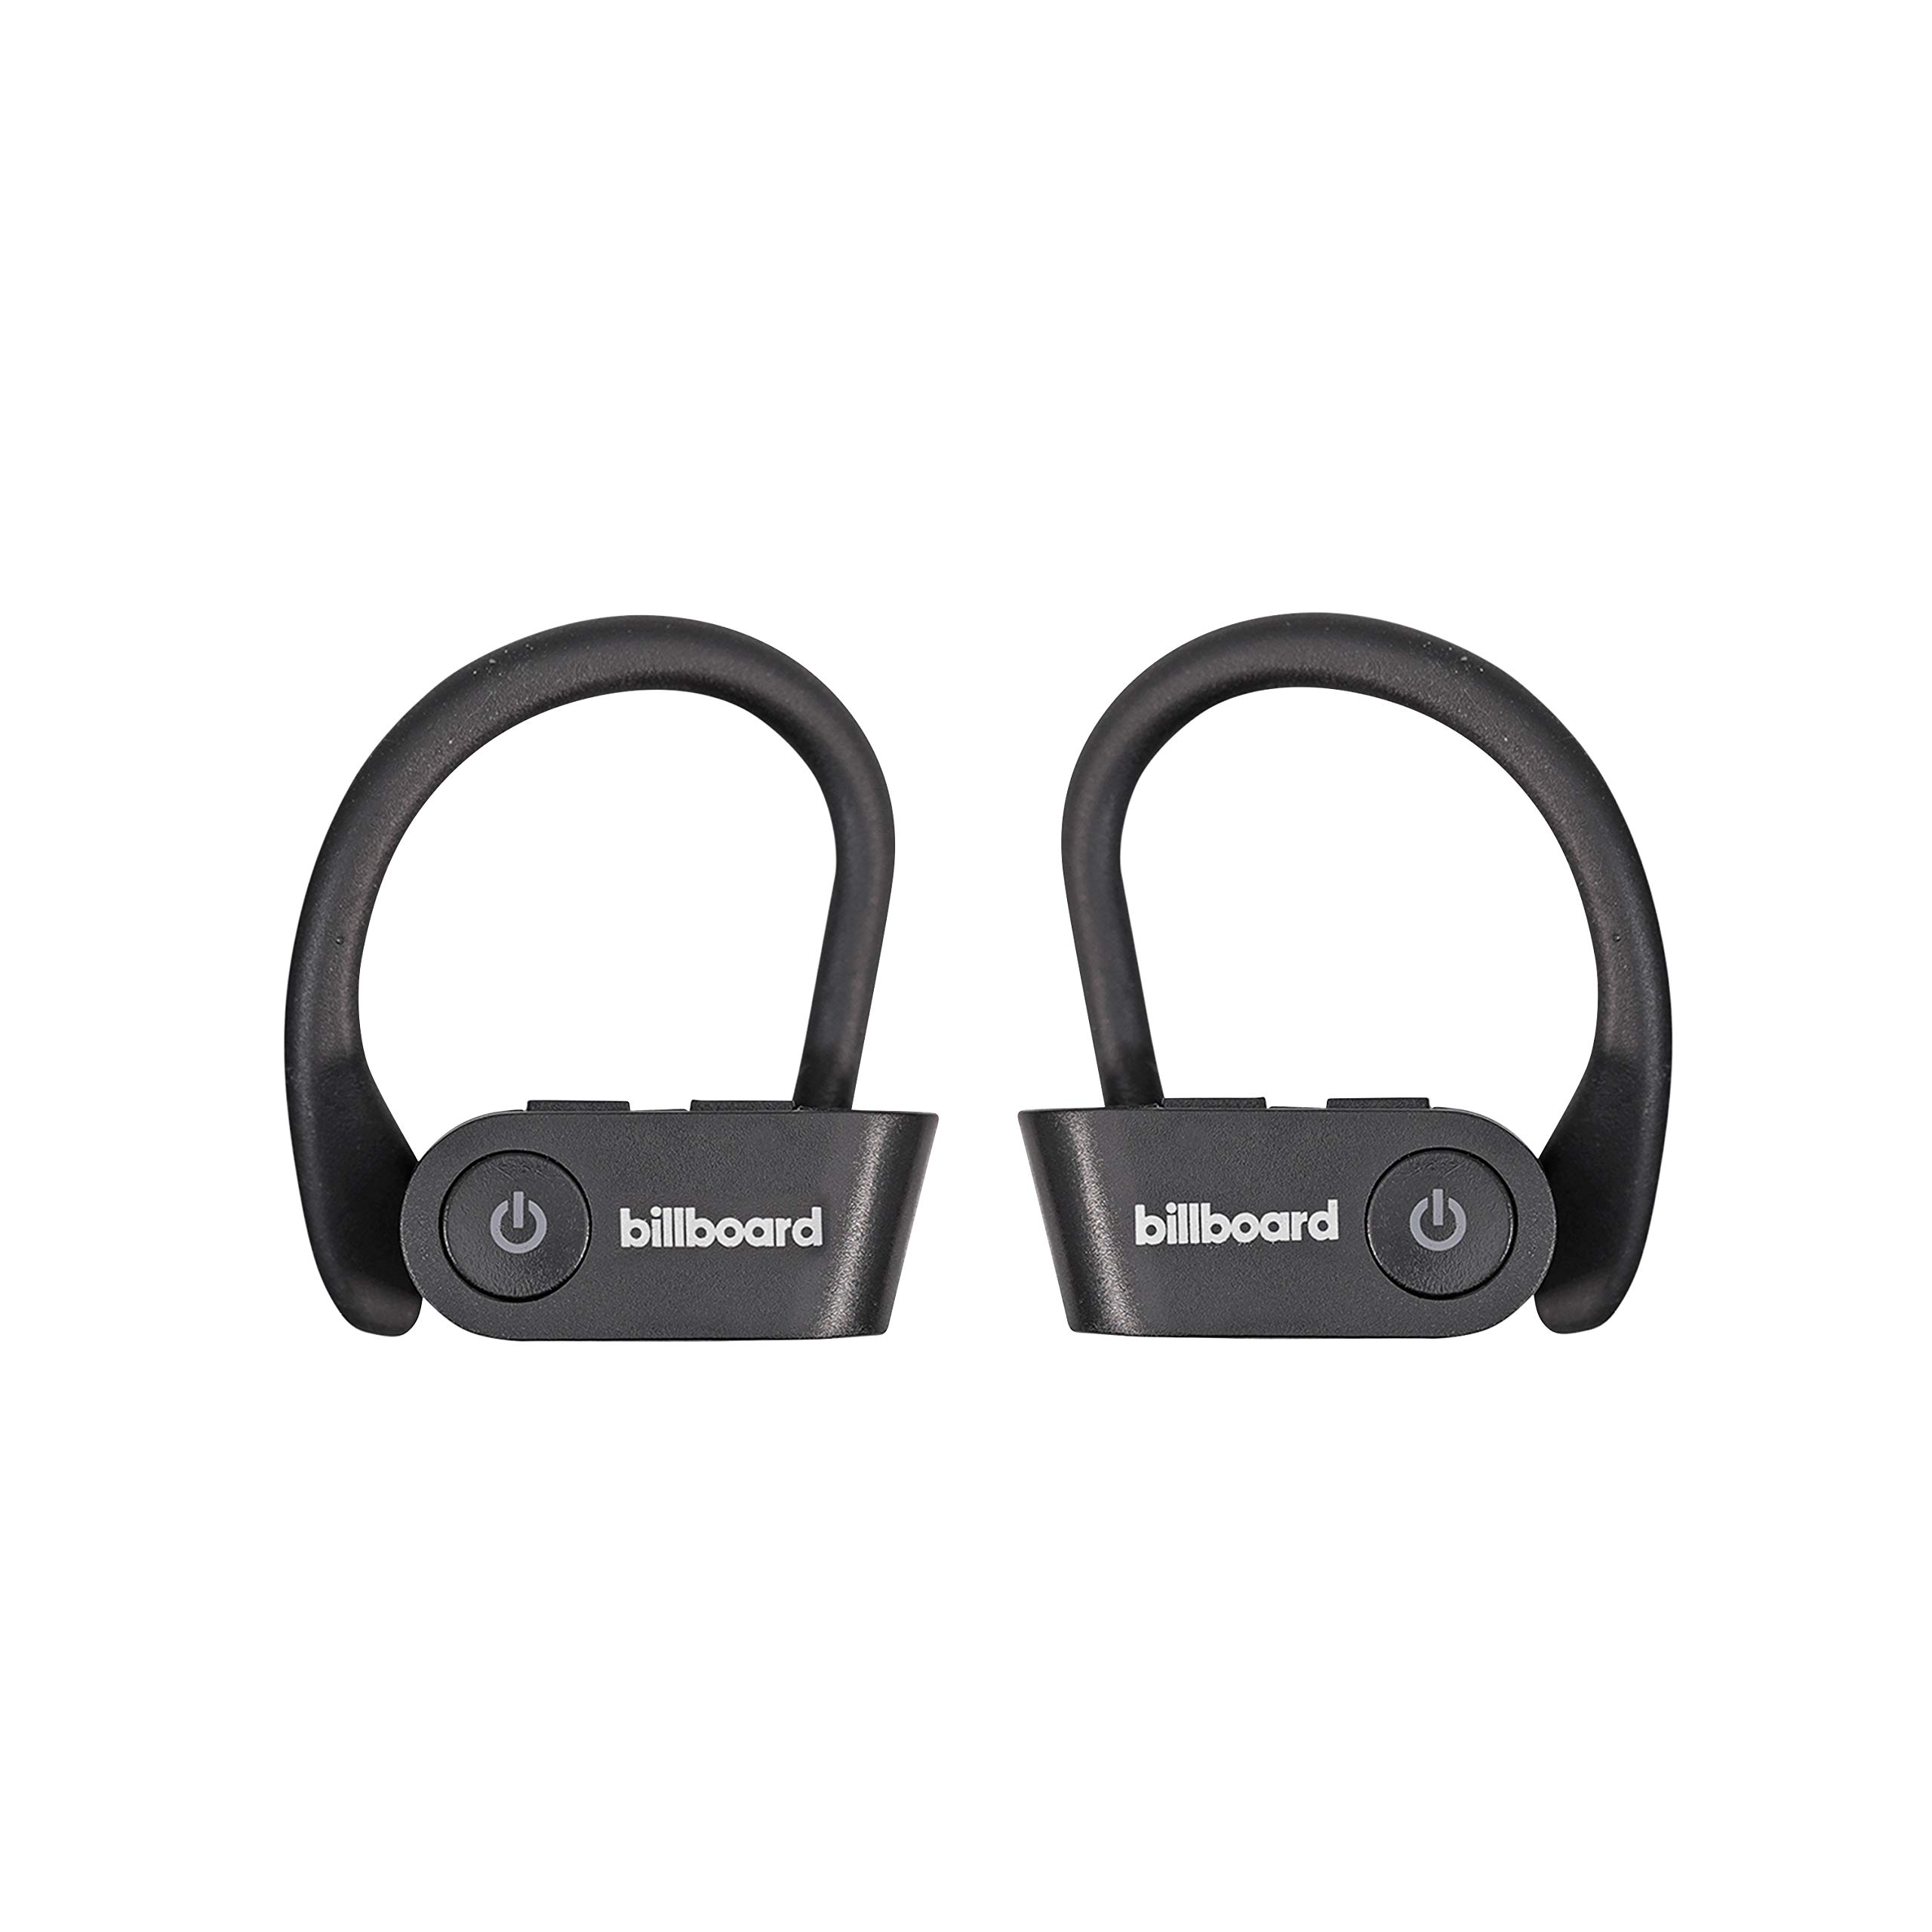 connecting-billboard-wireless-earbuds-a-quick-guide